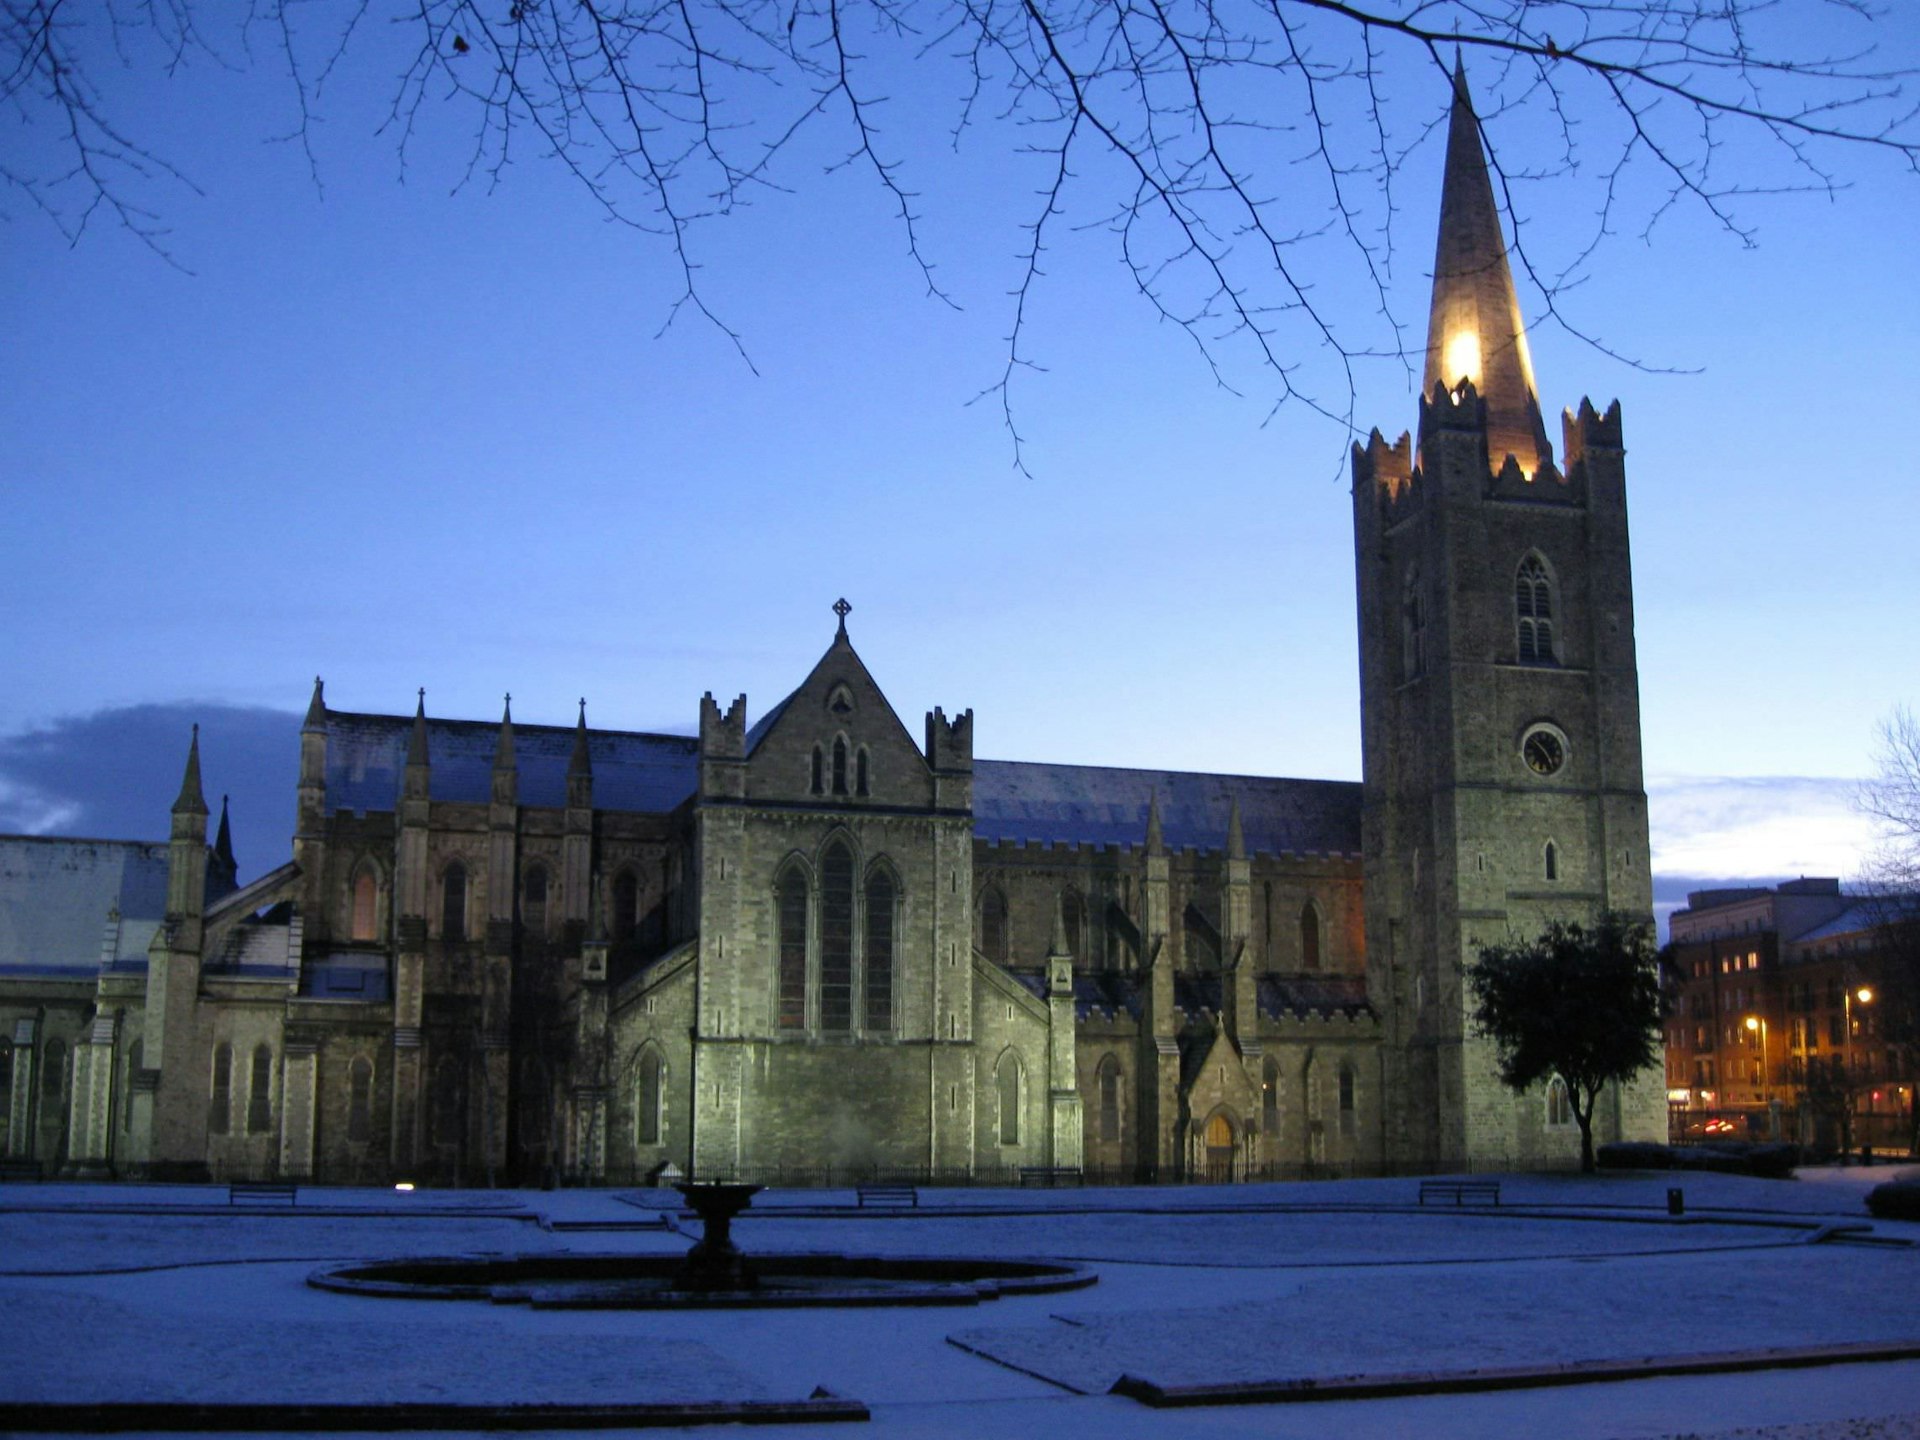 St Patrick's Cathedral, Dublin